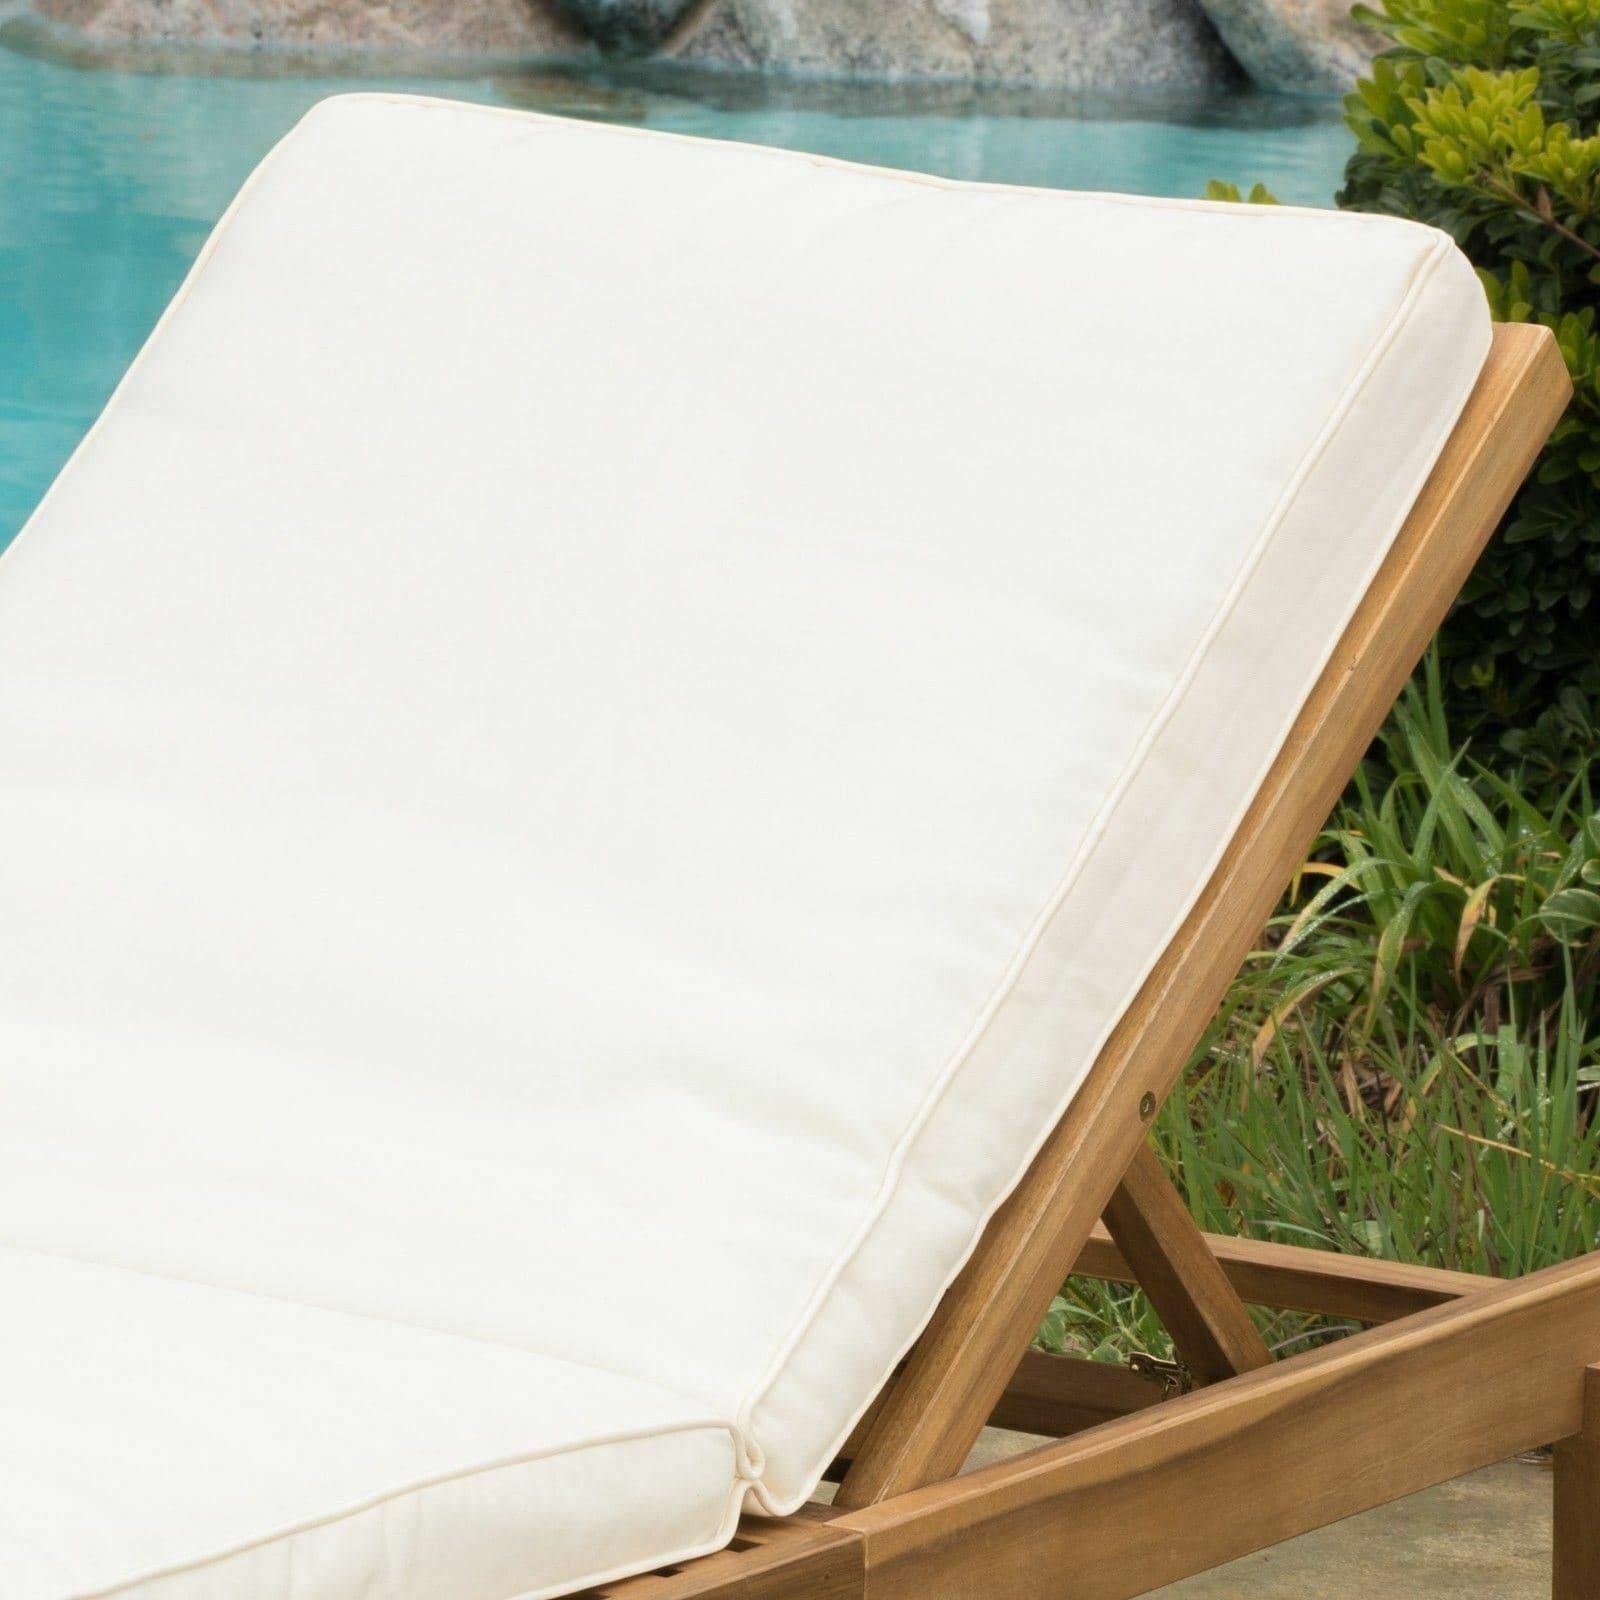 A white chaise lounge next to a pool.